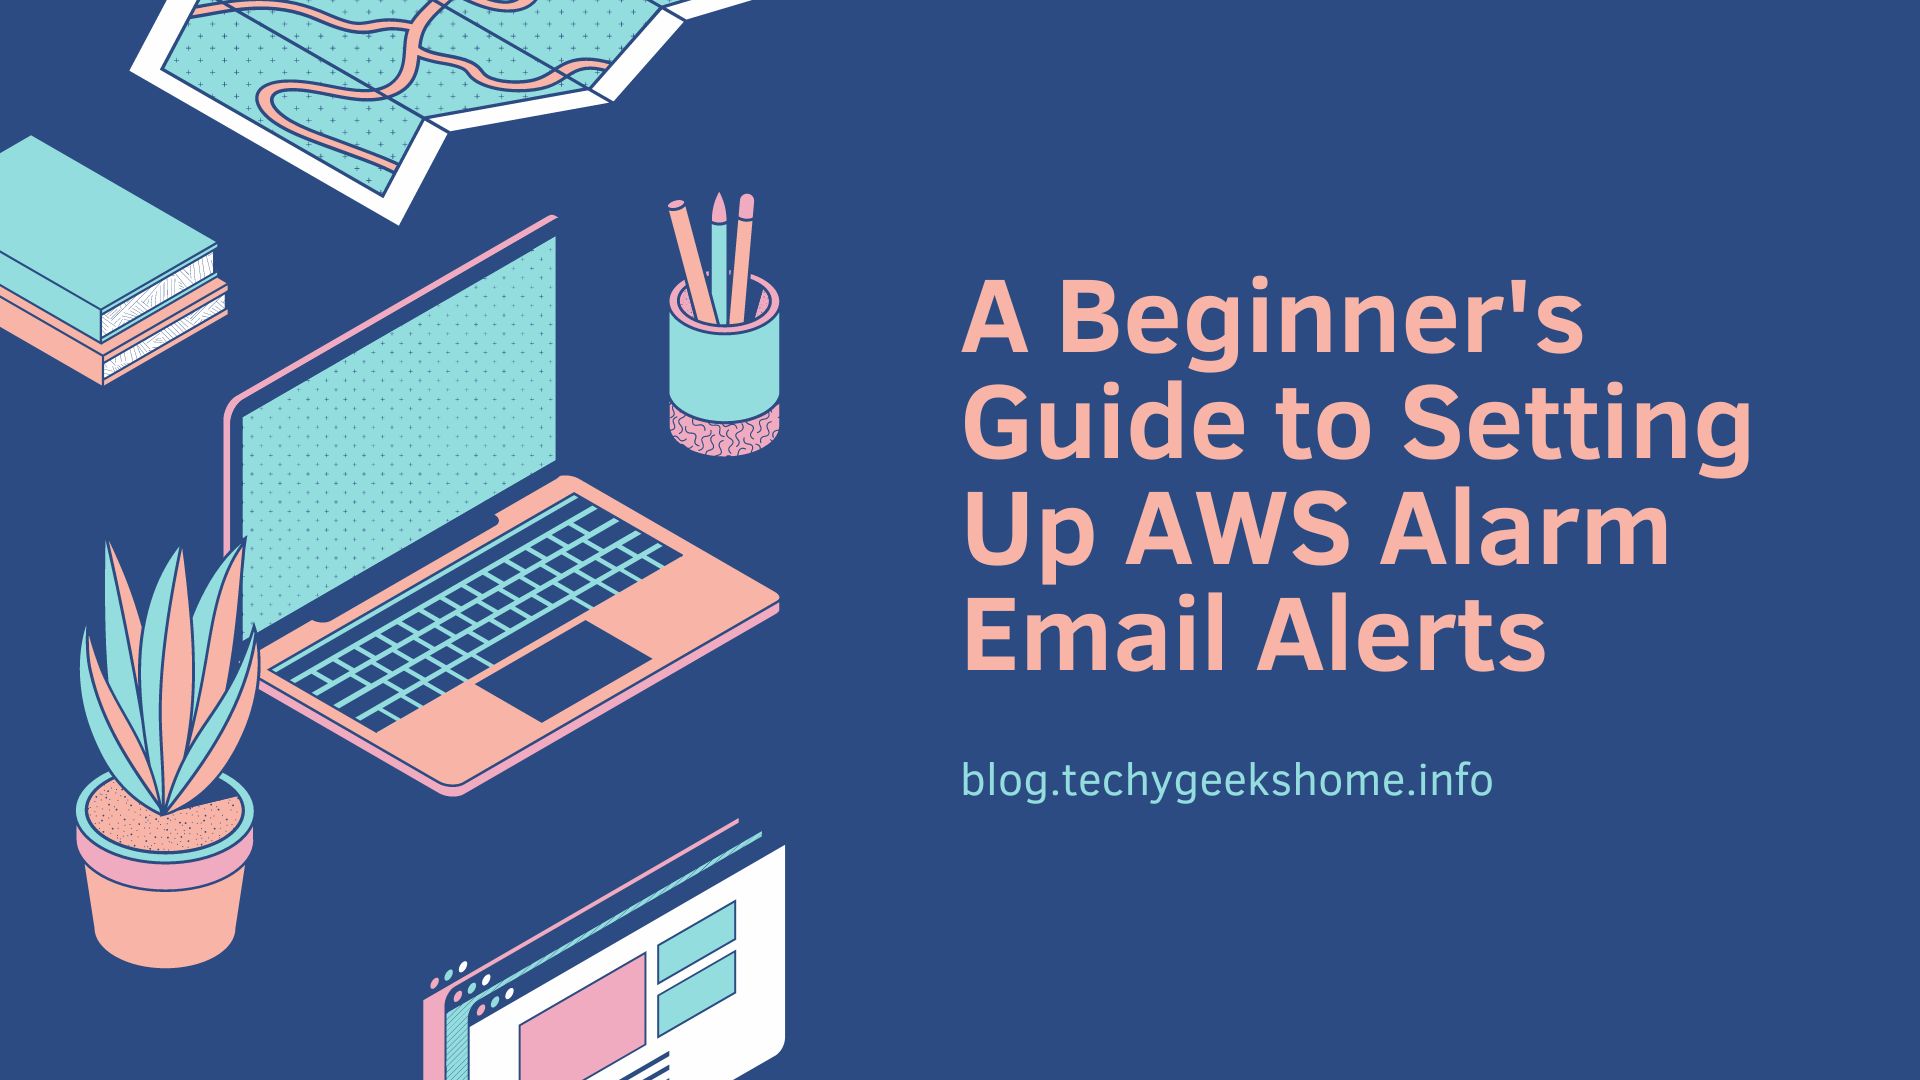 A Beginner’s Guide to Setting Up AWS Alarm Email Alerts using CloudWatch